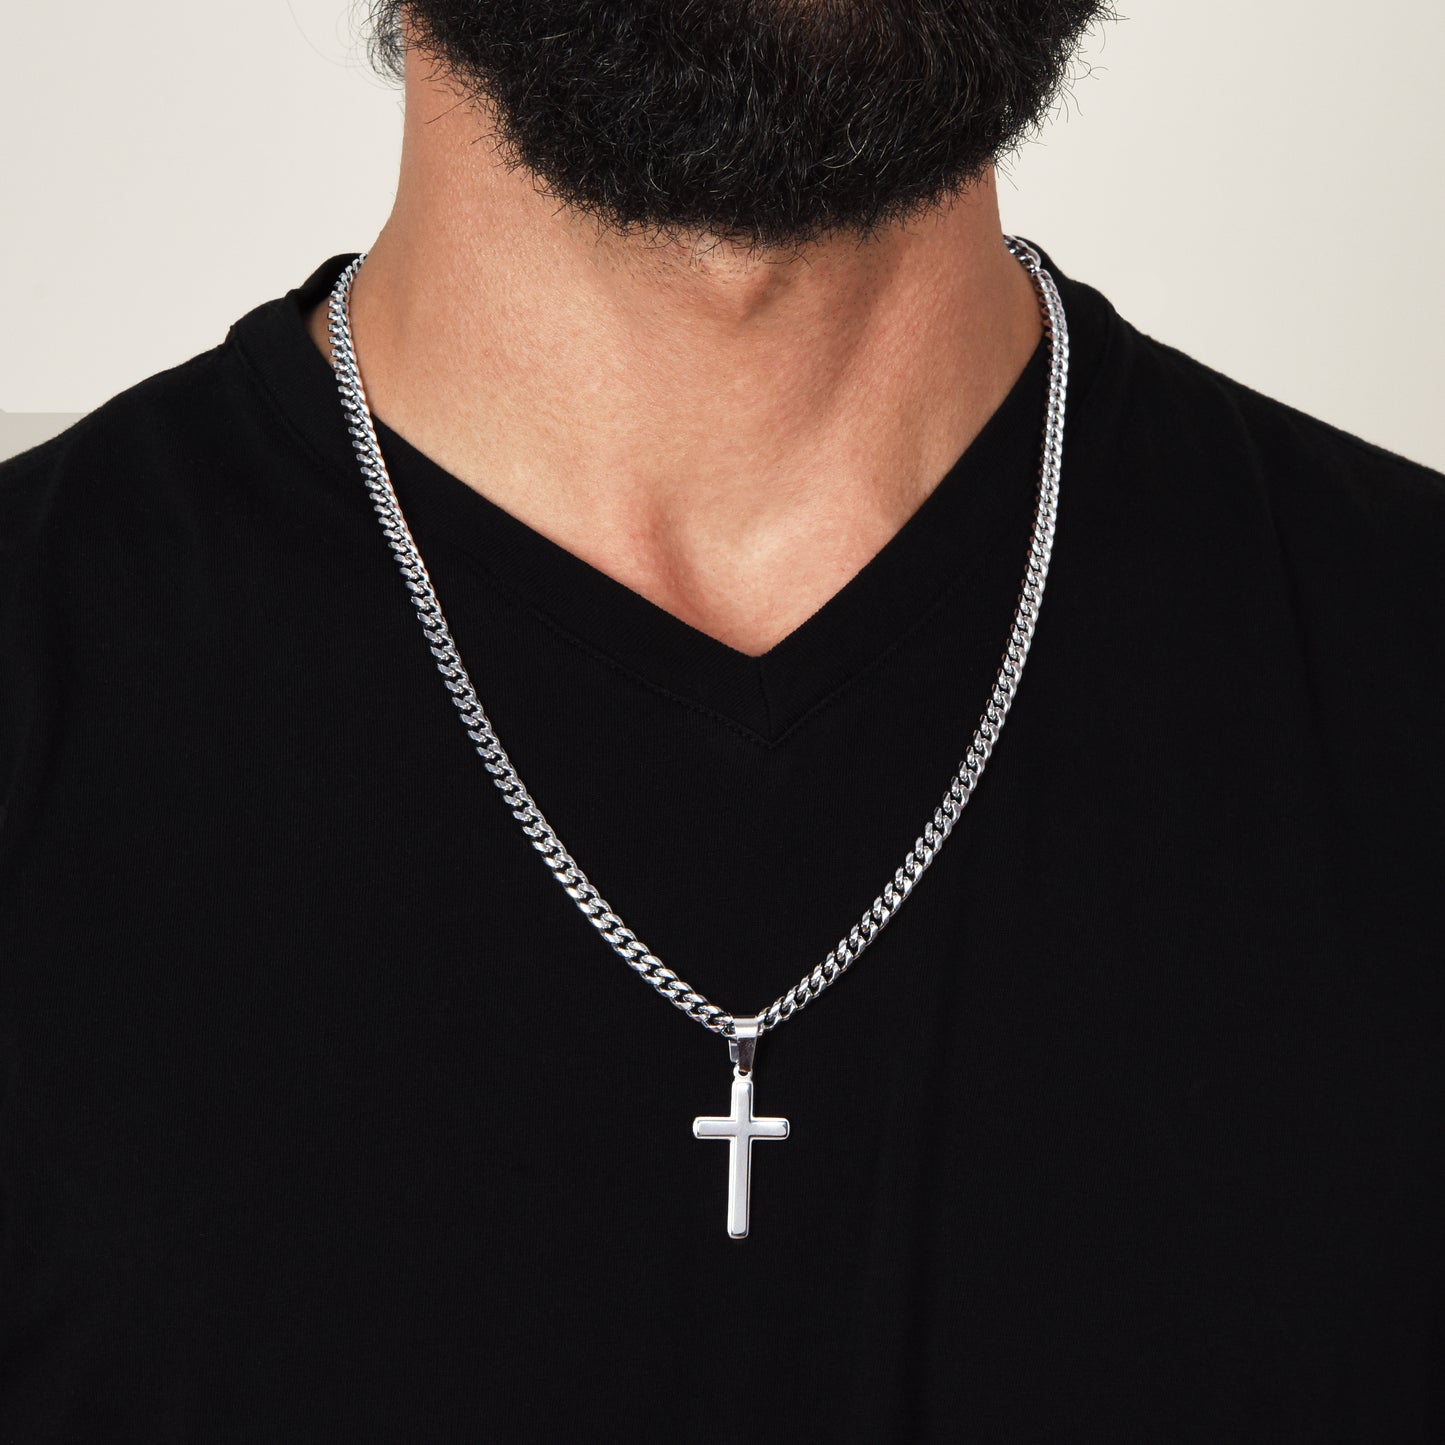 To My Boyfriend Gift, I Couldn't Imagine My Life Without You, Cross Pendant Cuban Chain Men Necklace